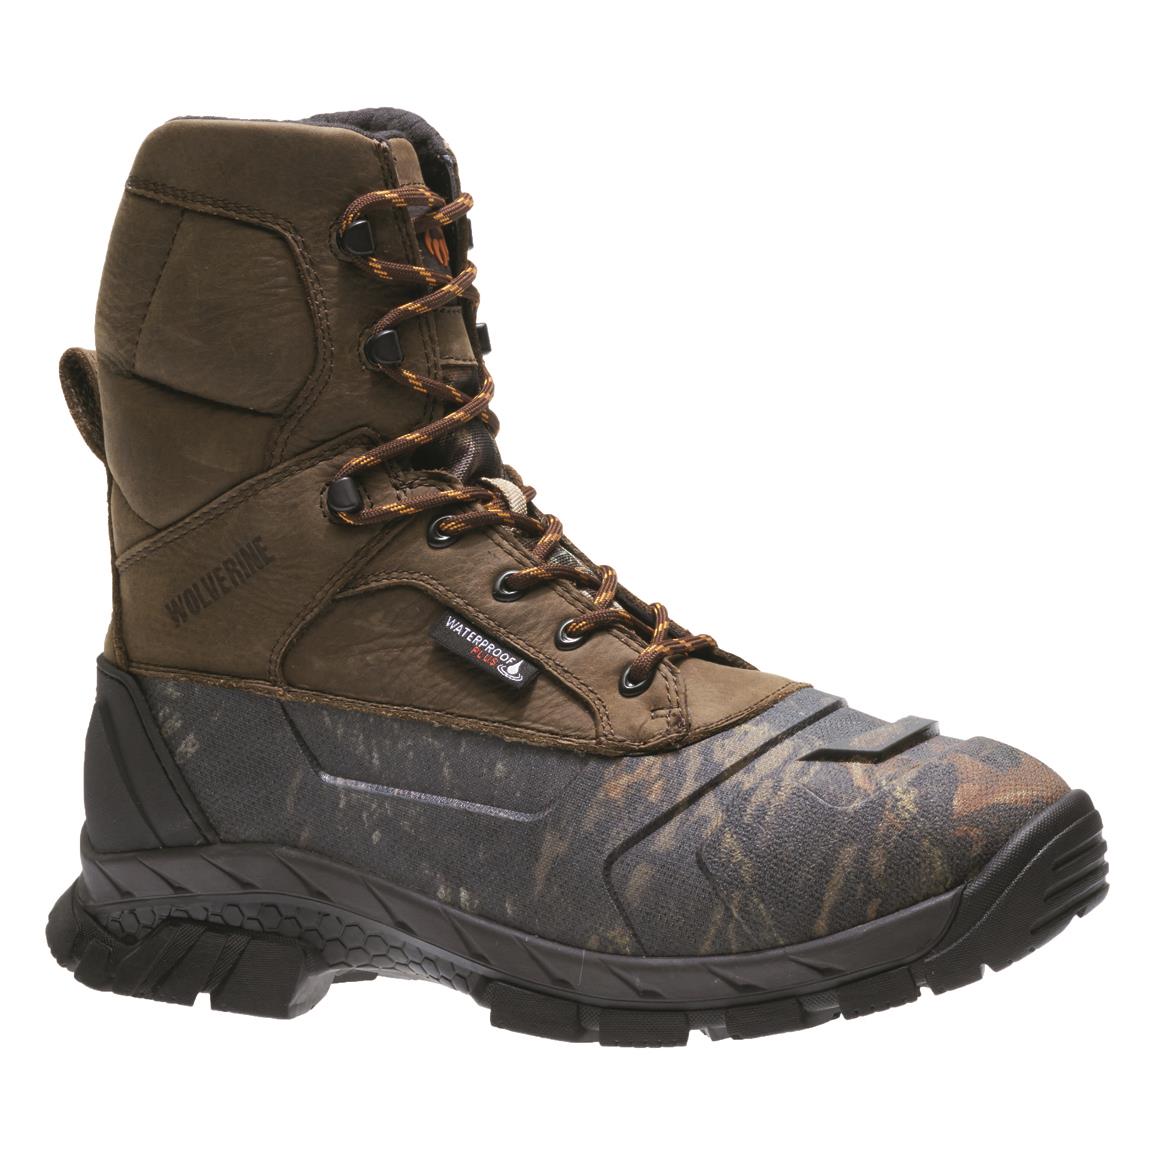 Wolverine Men's Vortex Waterproof Hunting Boots - 699816, Hunting Boots ...